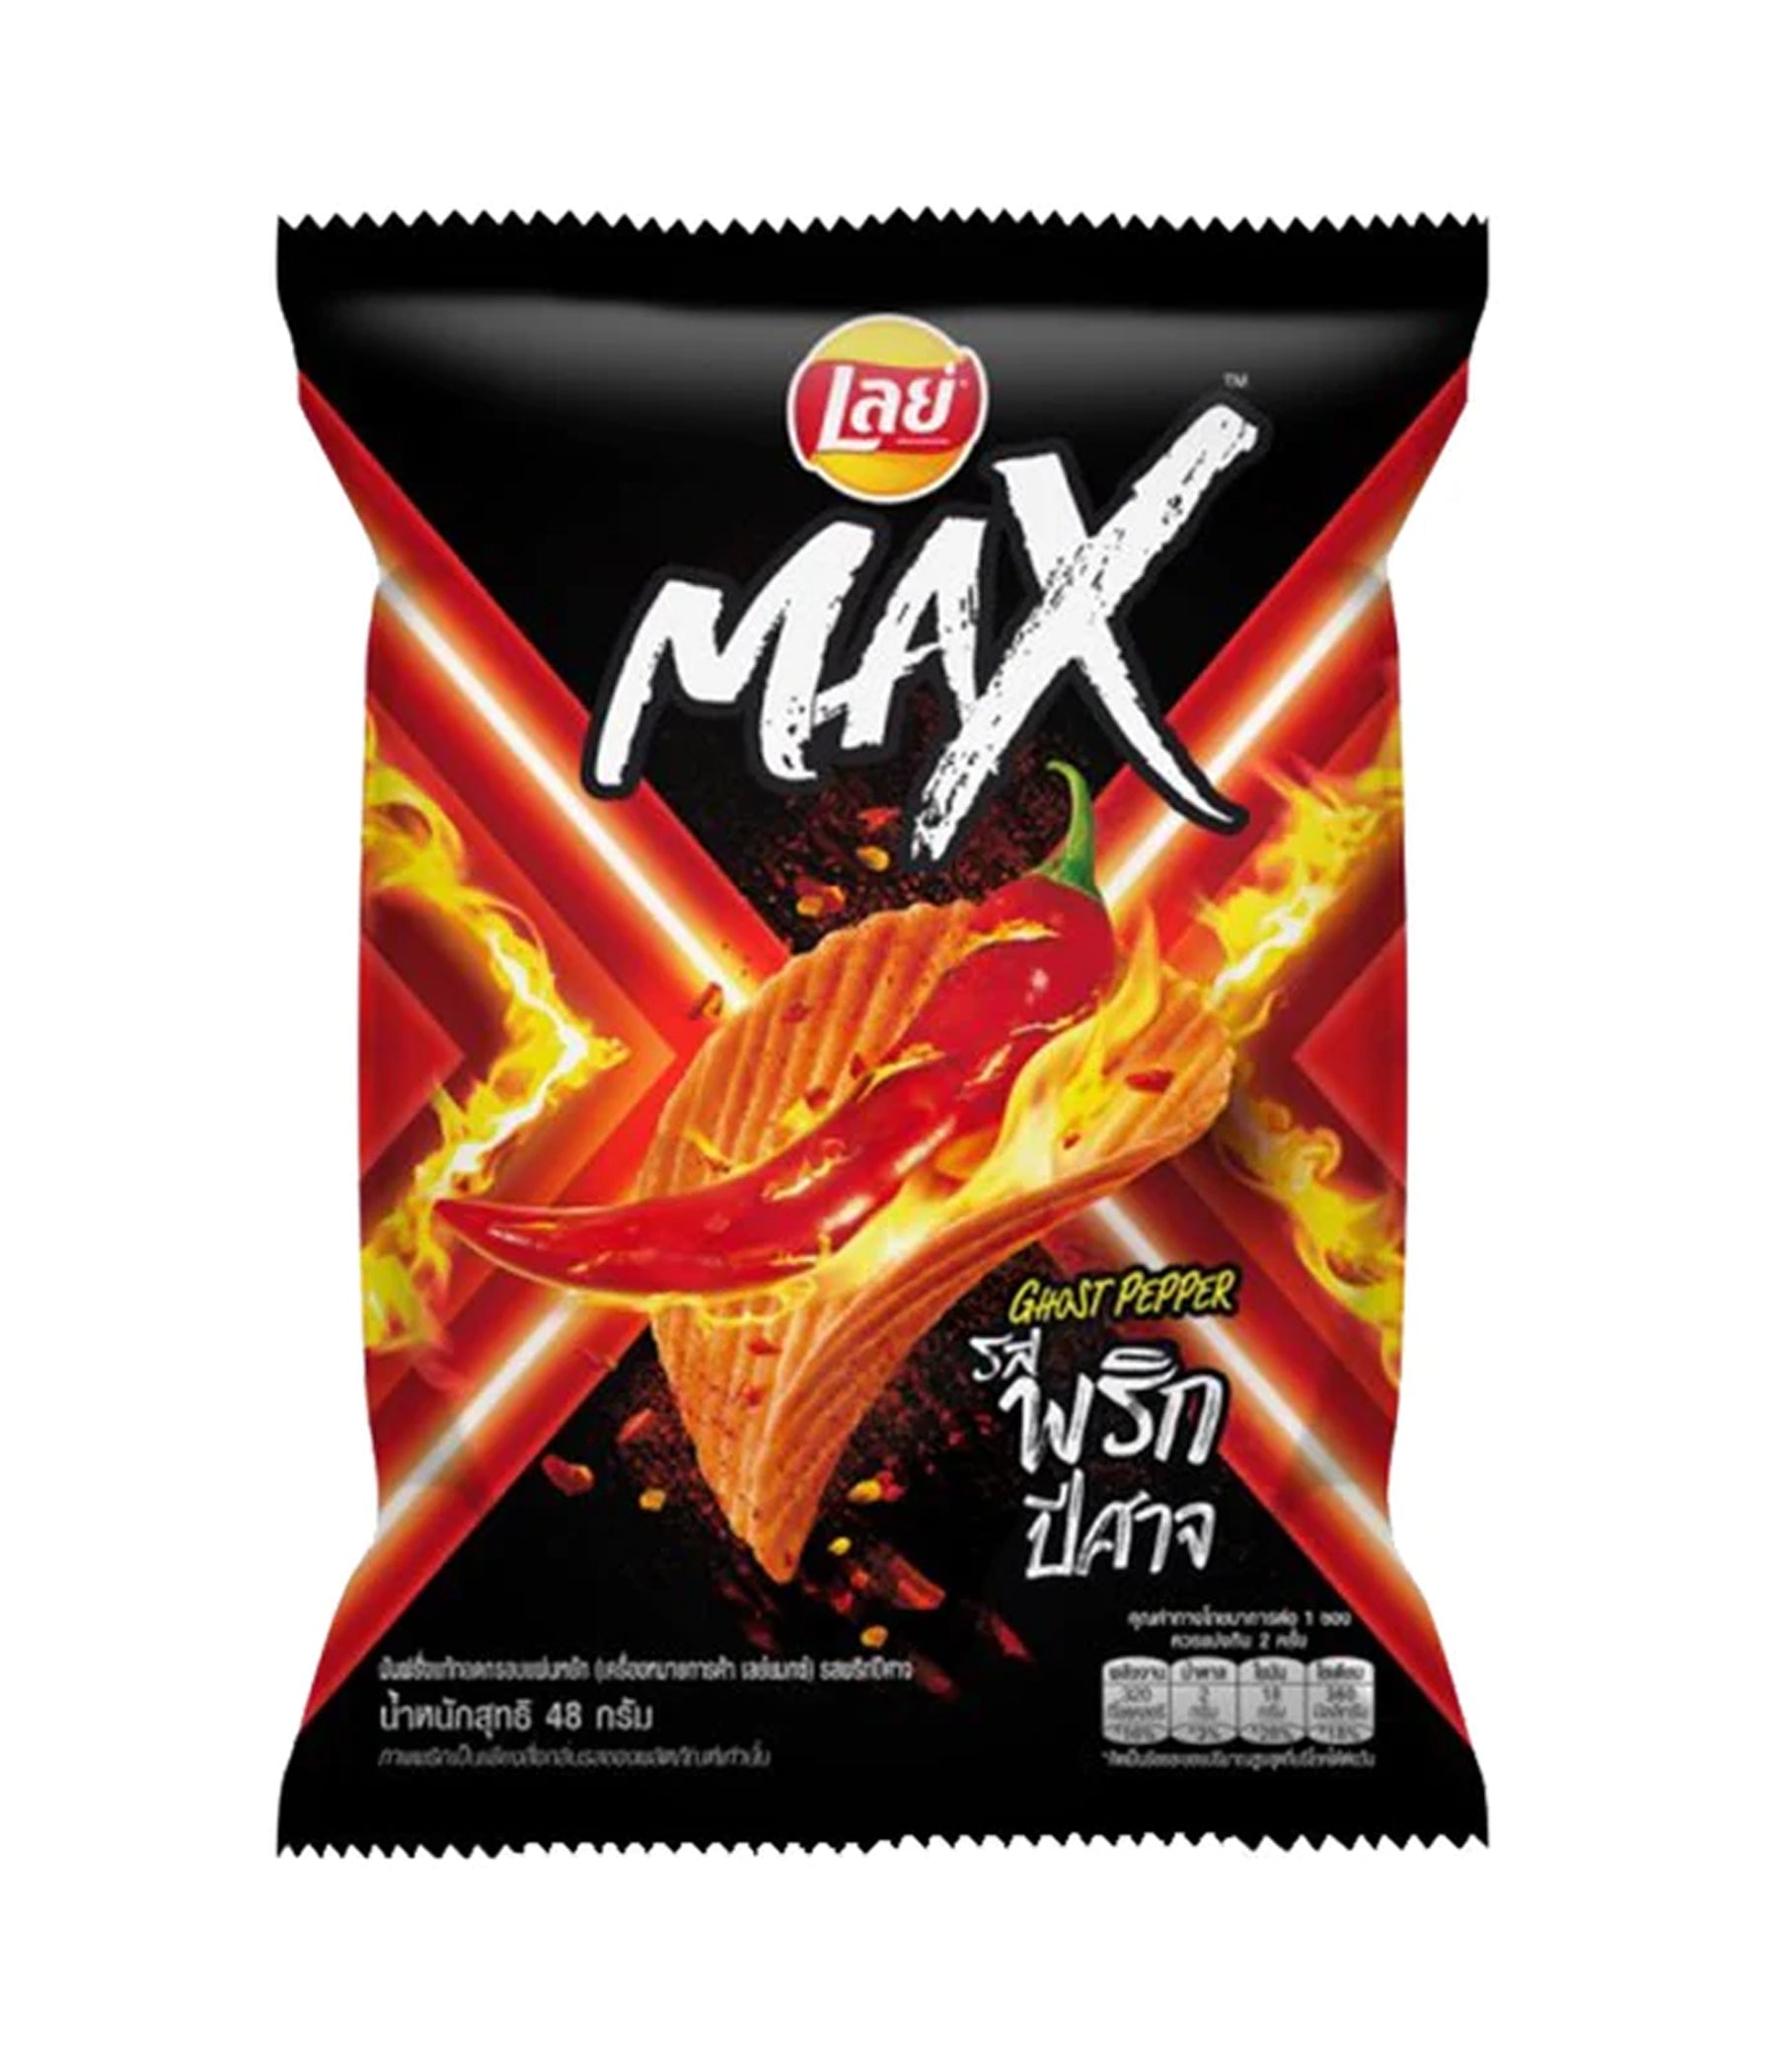 Lay's max ghost pepper